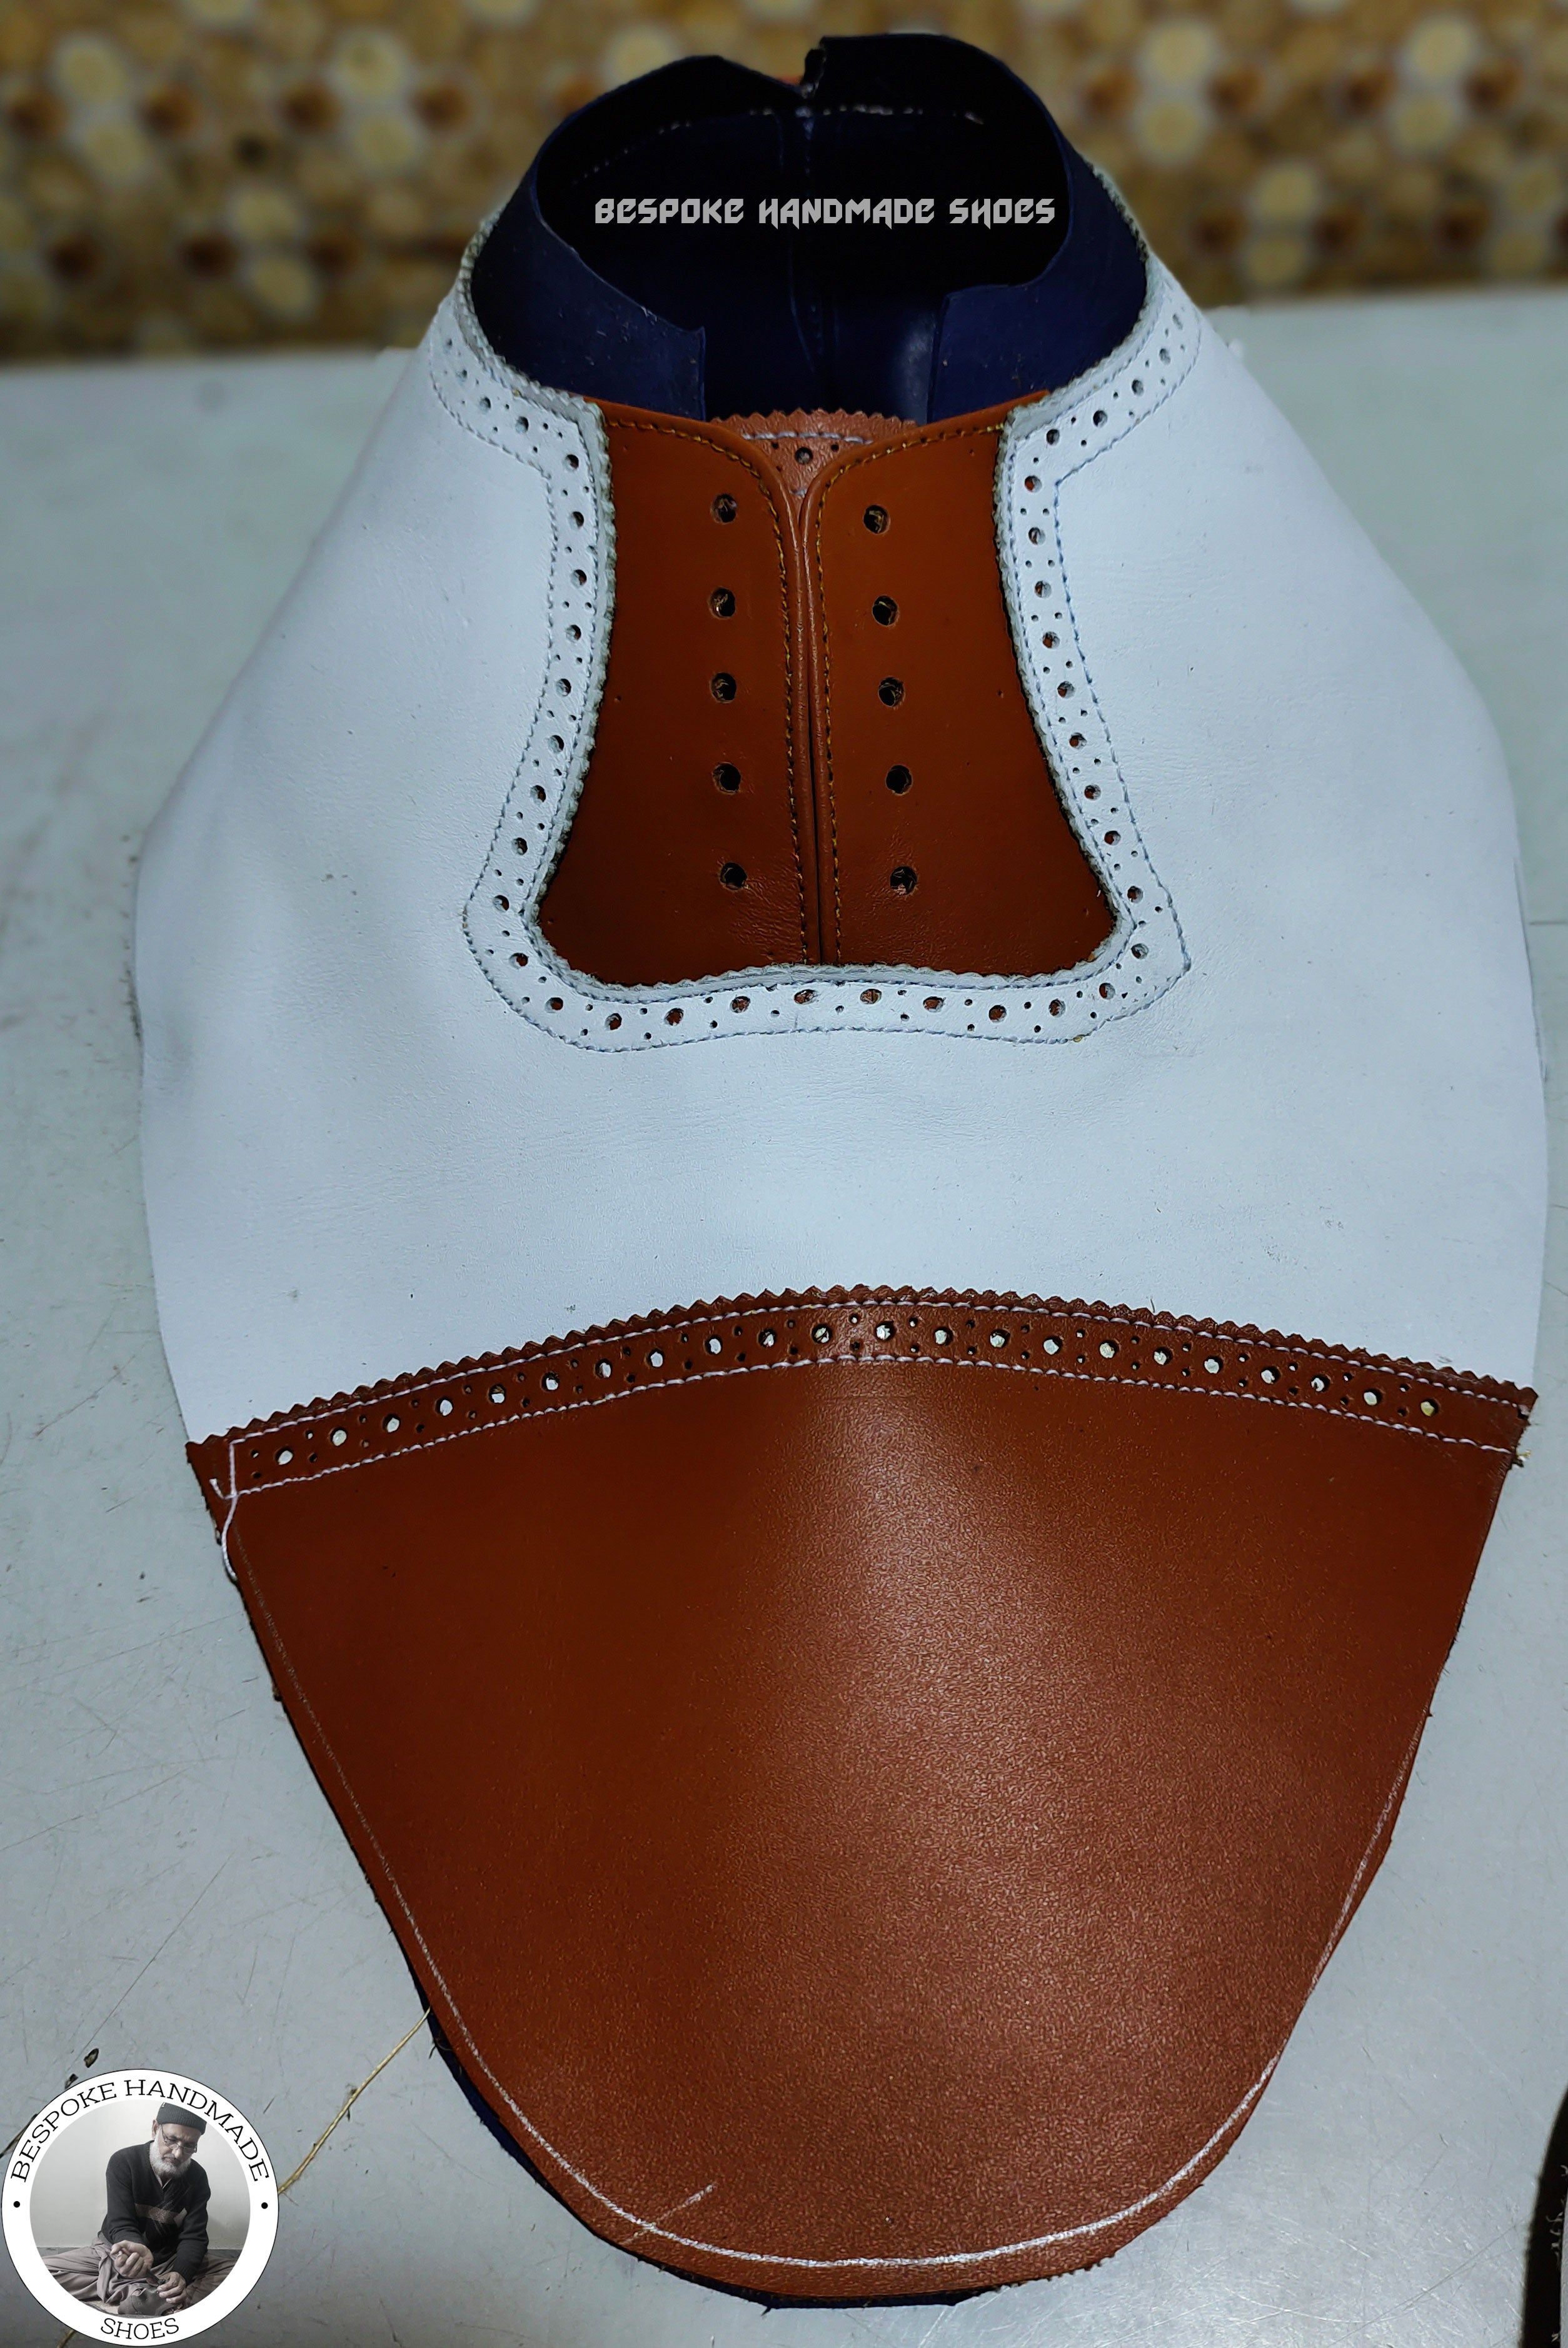 Handcrafted Men's White and Brown Leather Toe cap Brogue Oxford Lace up Formal Shoes